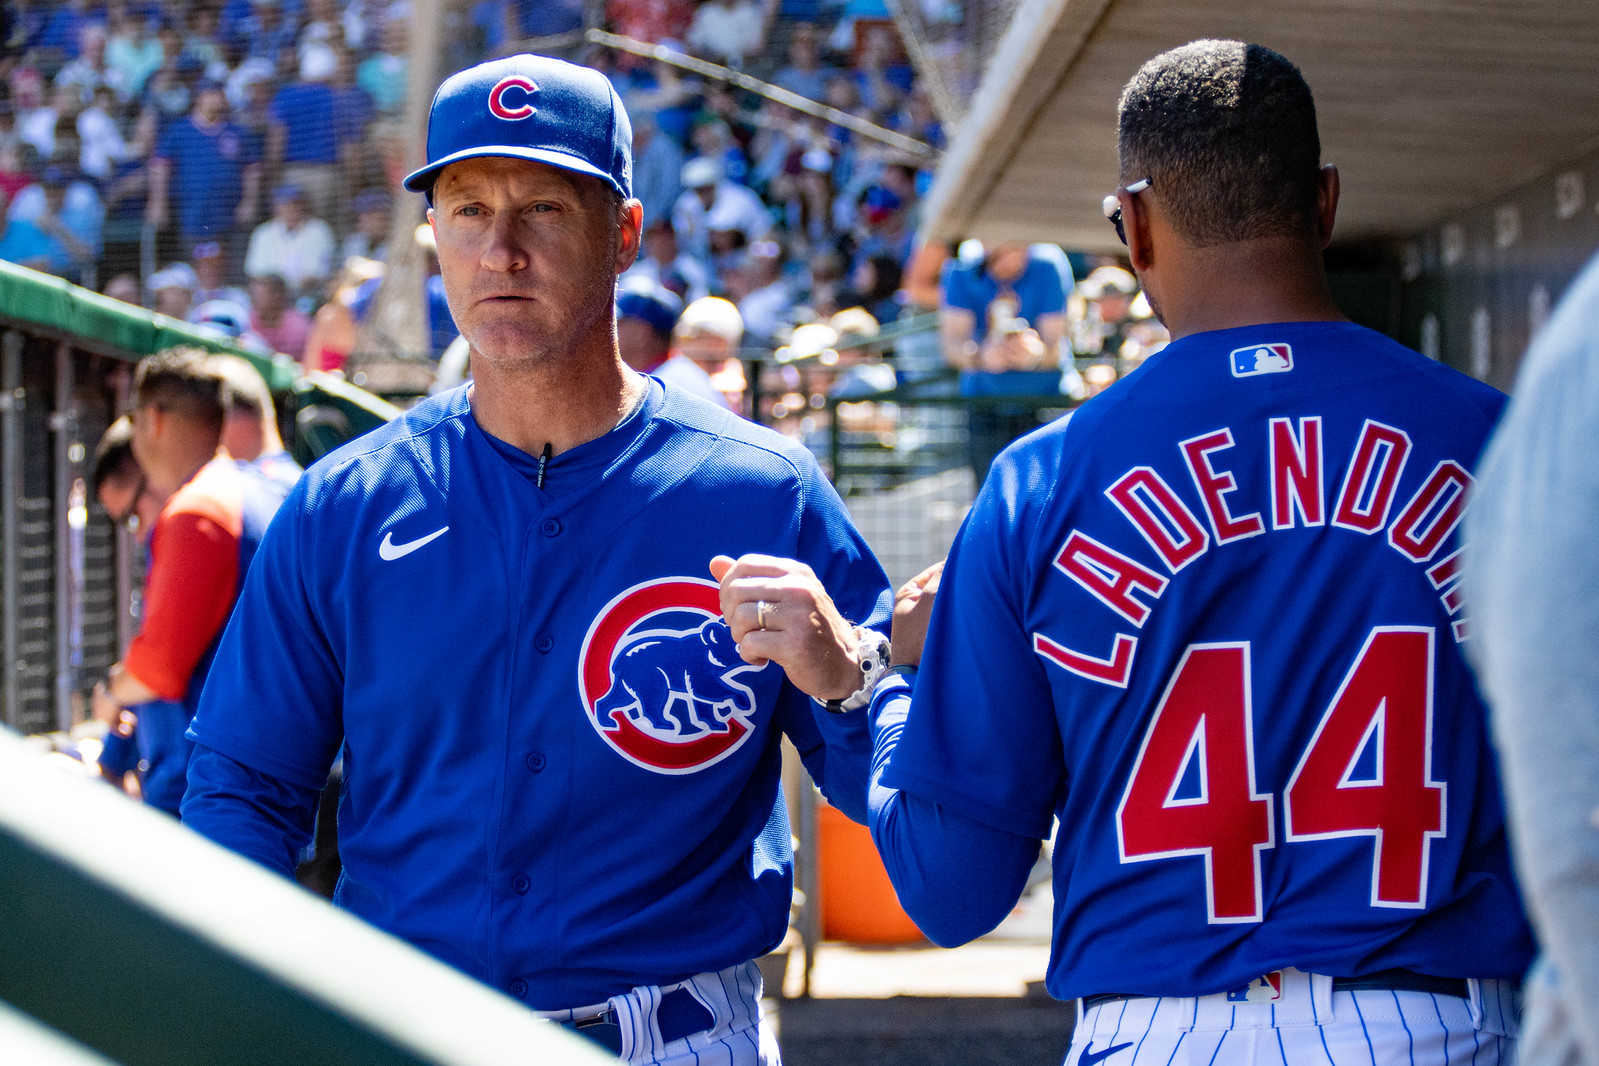 Albany's Kevin Graber enjoying new role as Double-A manager for Cubs